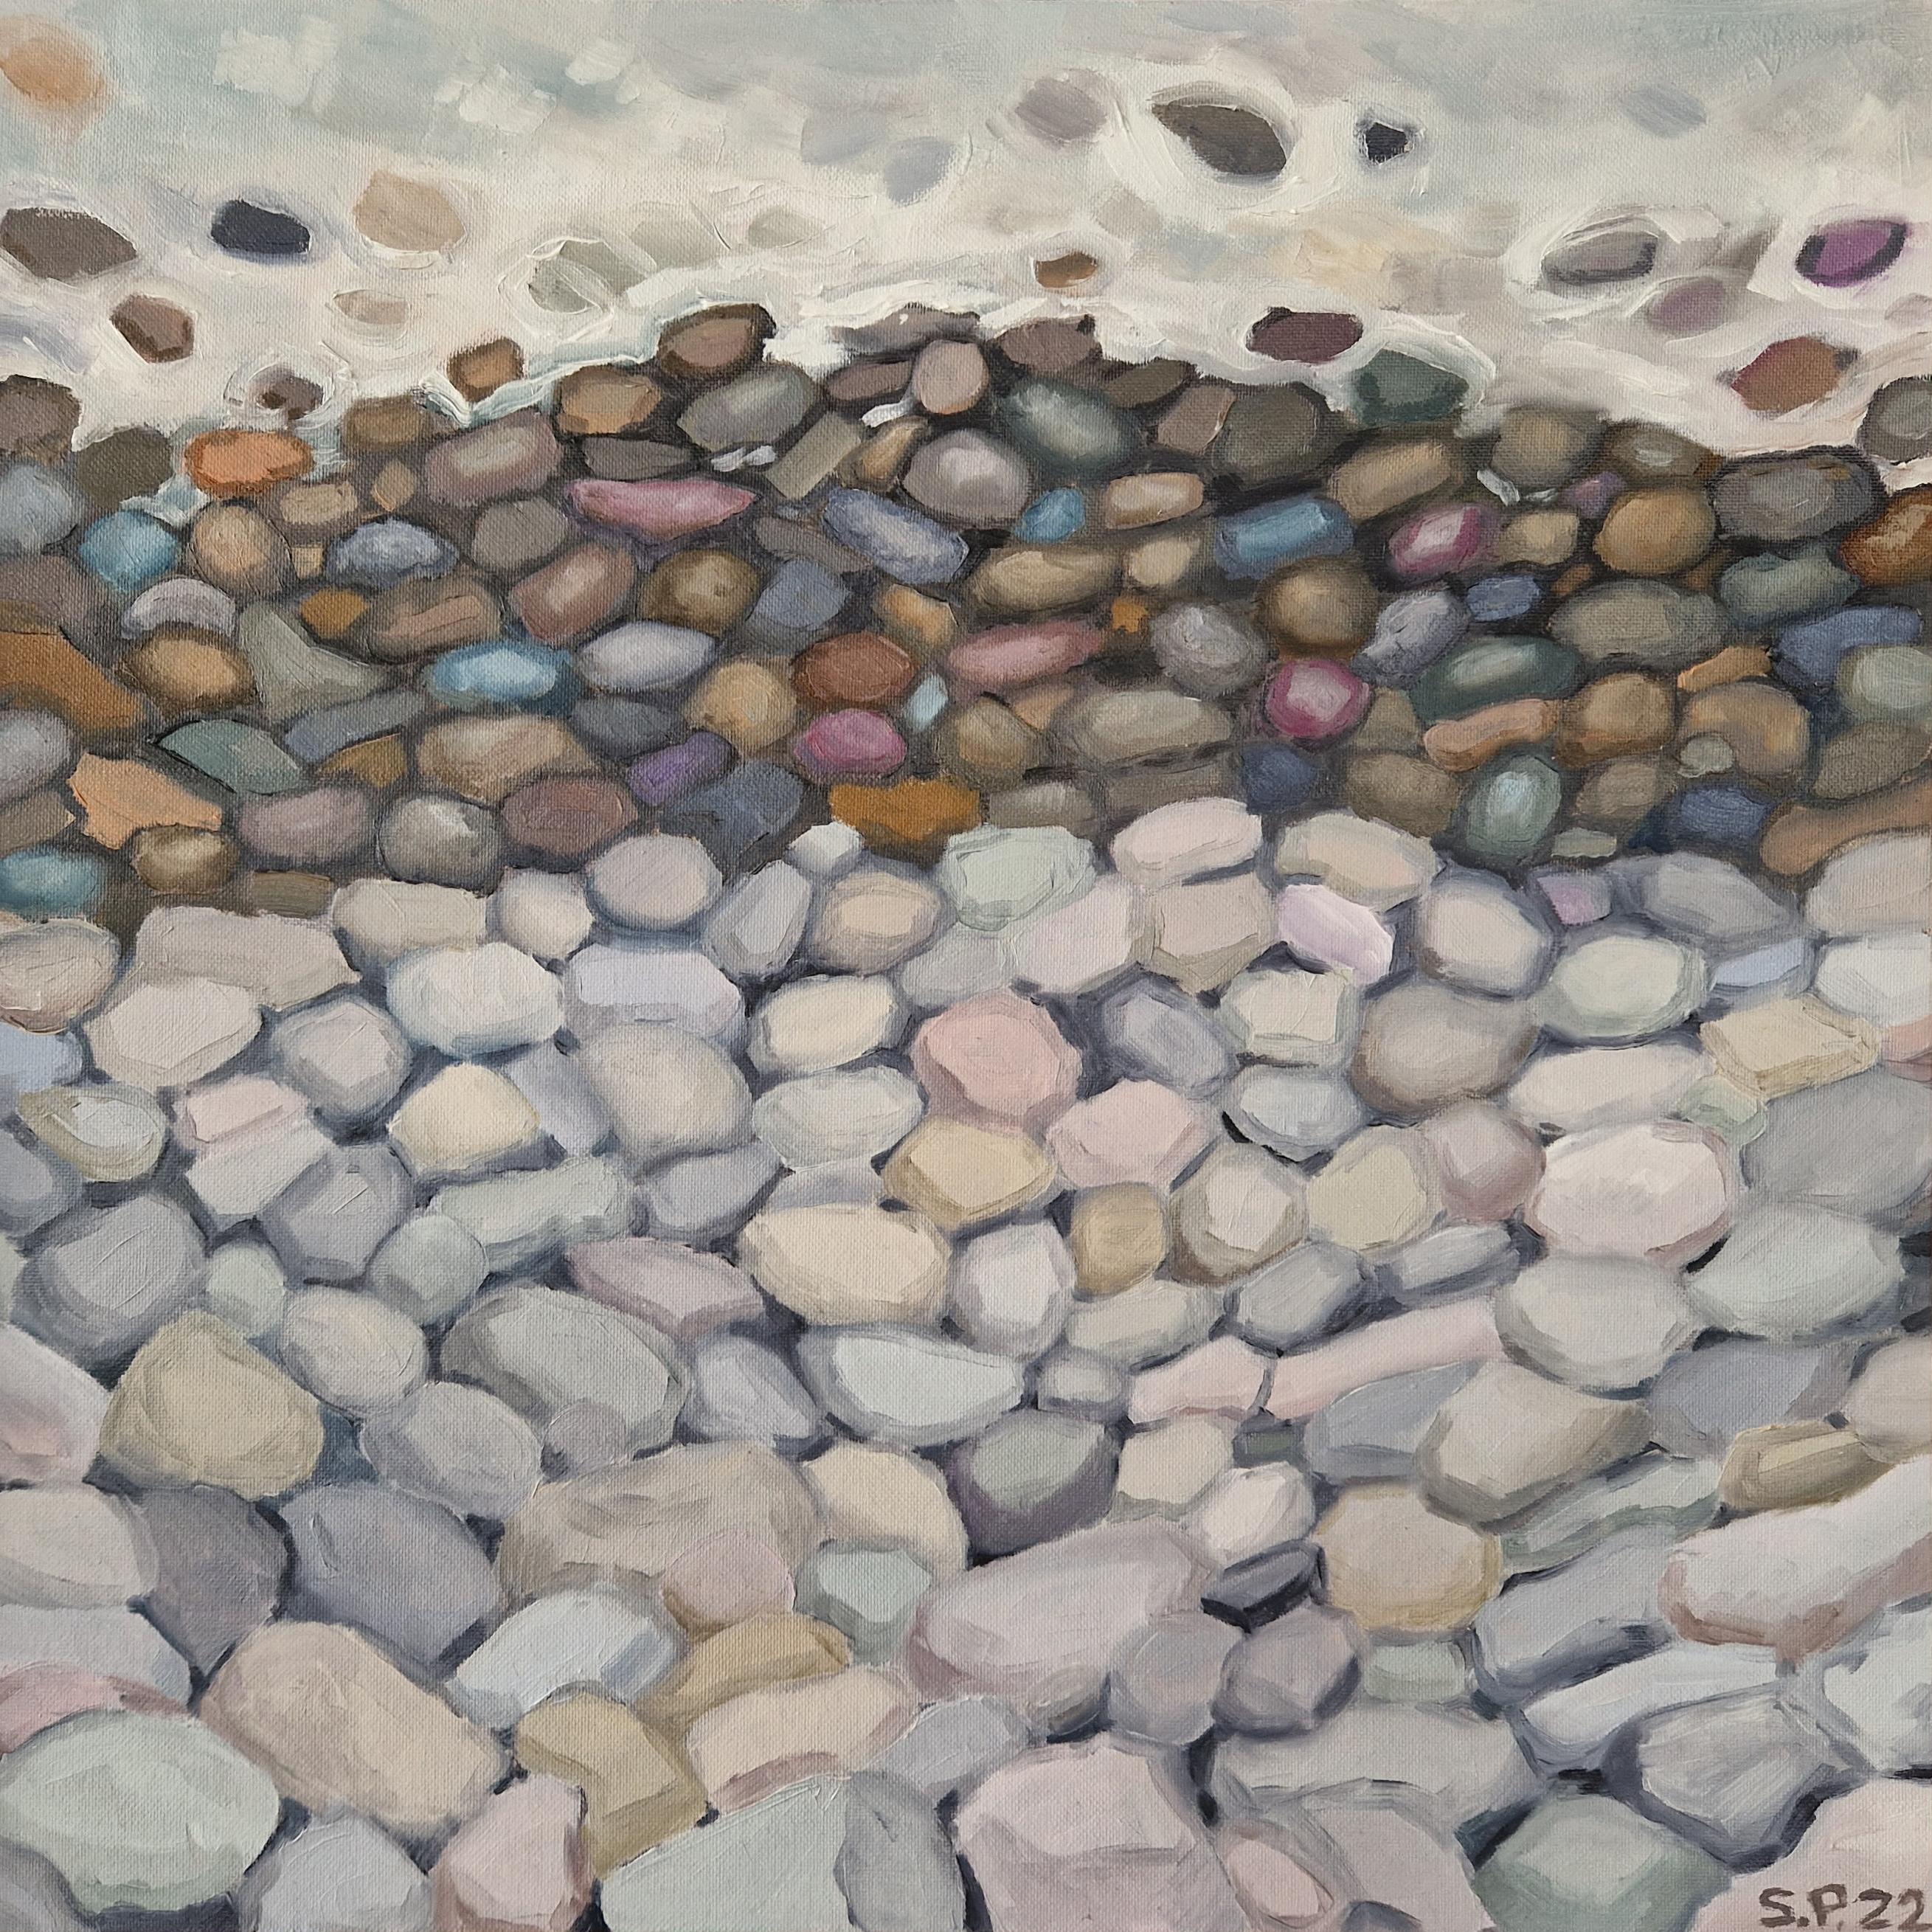 The painting 'Pebbles 3'.